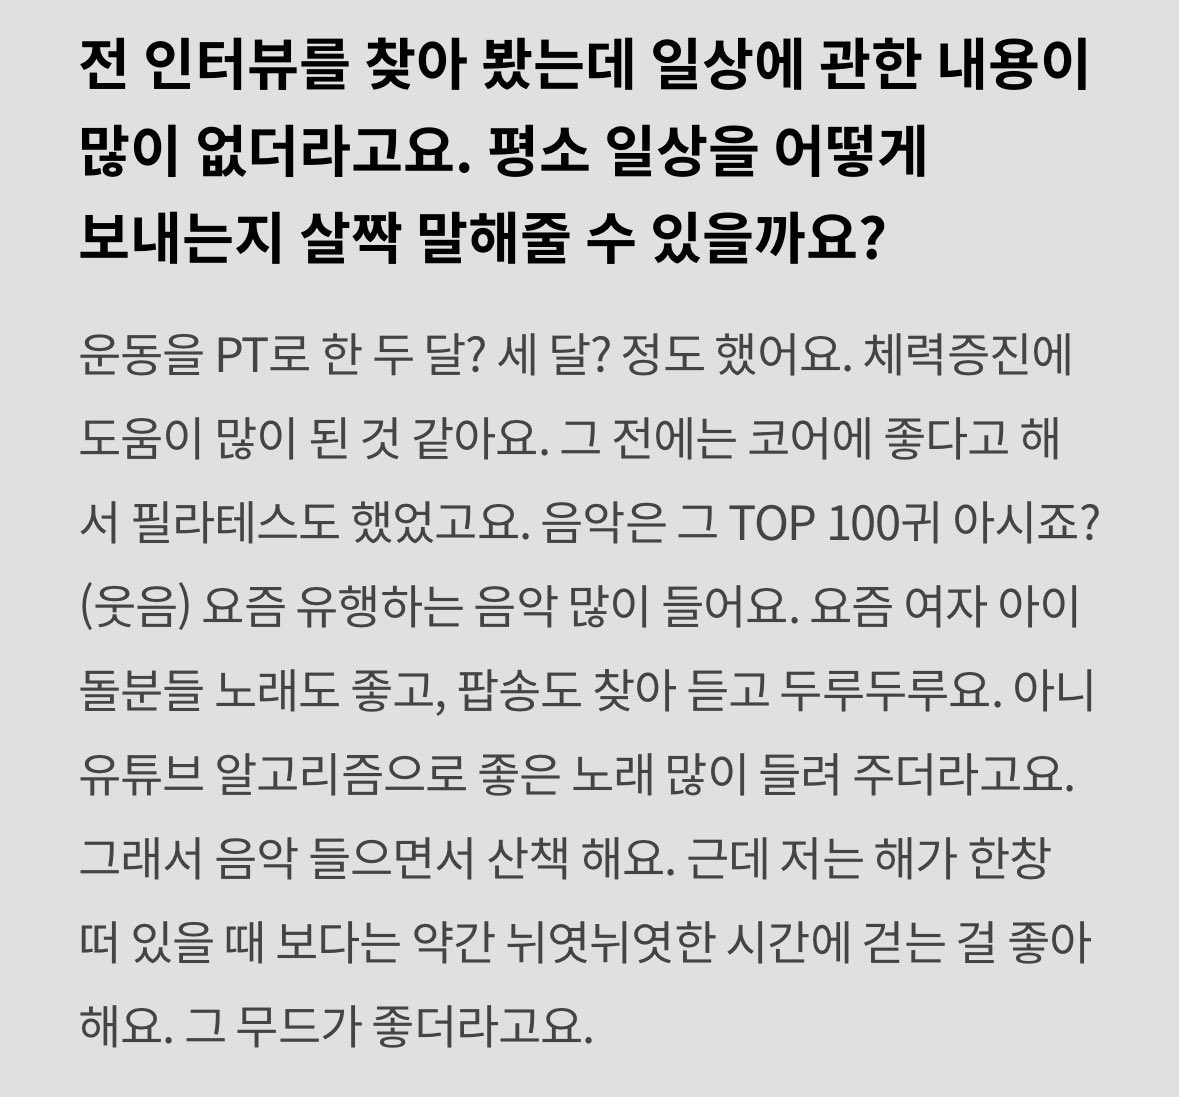 #KimJiWon for cosmopolitan Q: On her daily life activity A: I worked out with a PT for 2 to 3 months it helped improve my physical strength, before that i did pilates bcos it's good for core, i listen to top 100 songs and go for quiet time walk when it's dark, I like that mood